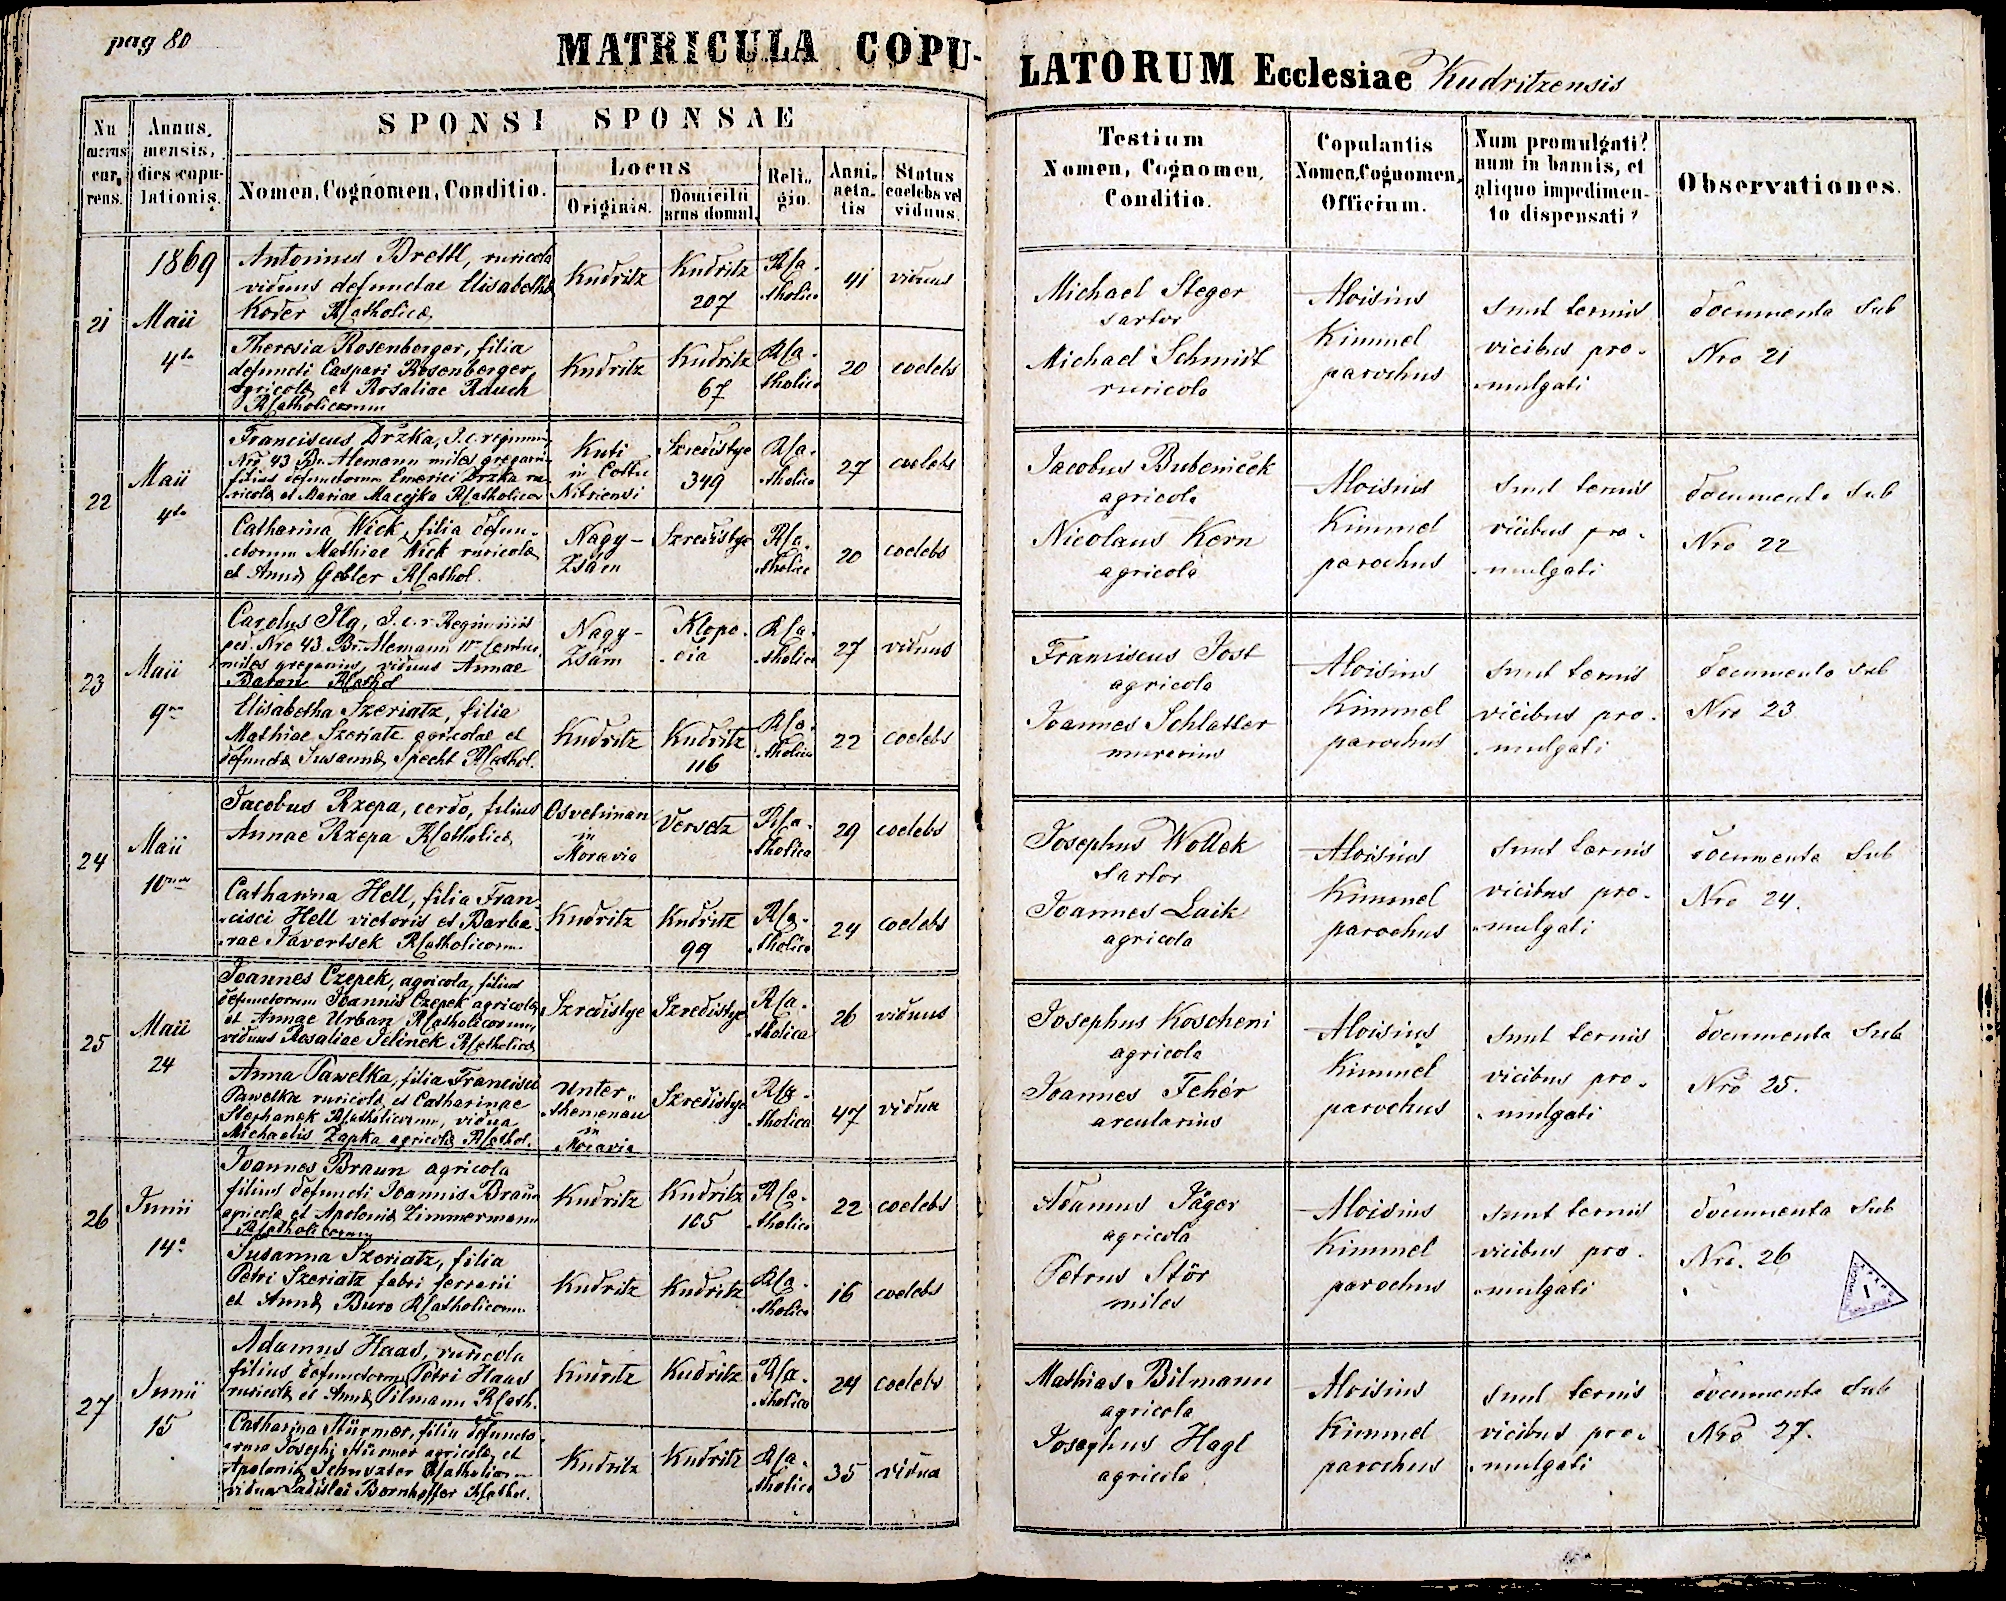 images/church_records/MARRIAGES/1852-1871M/080